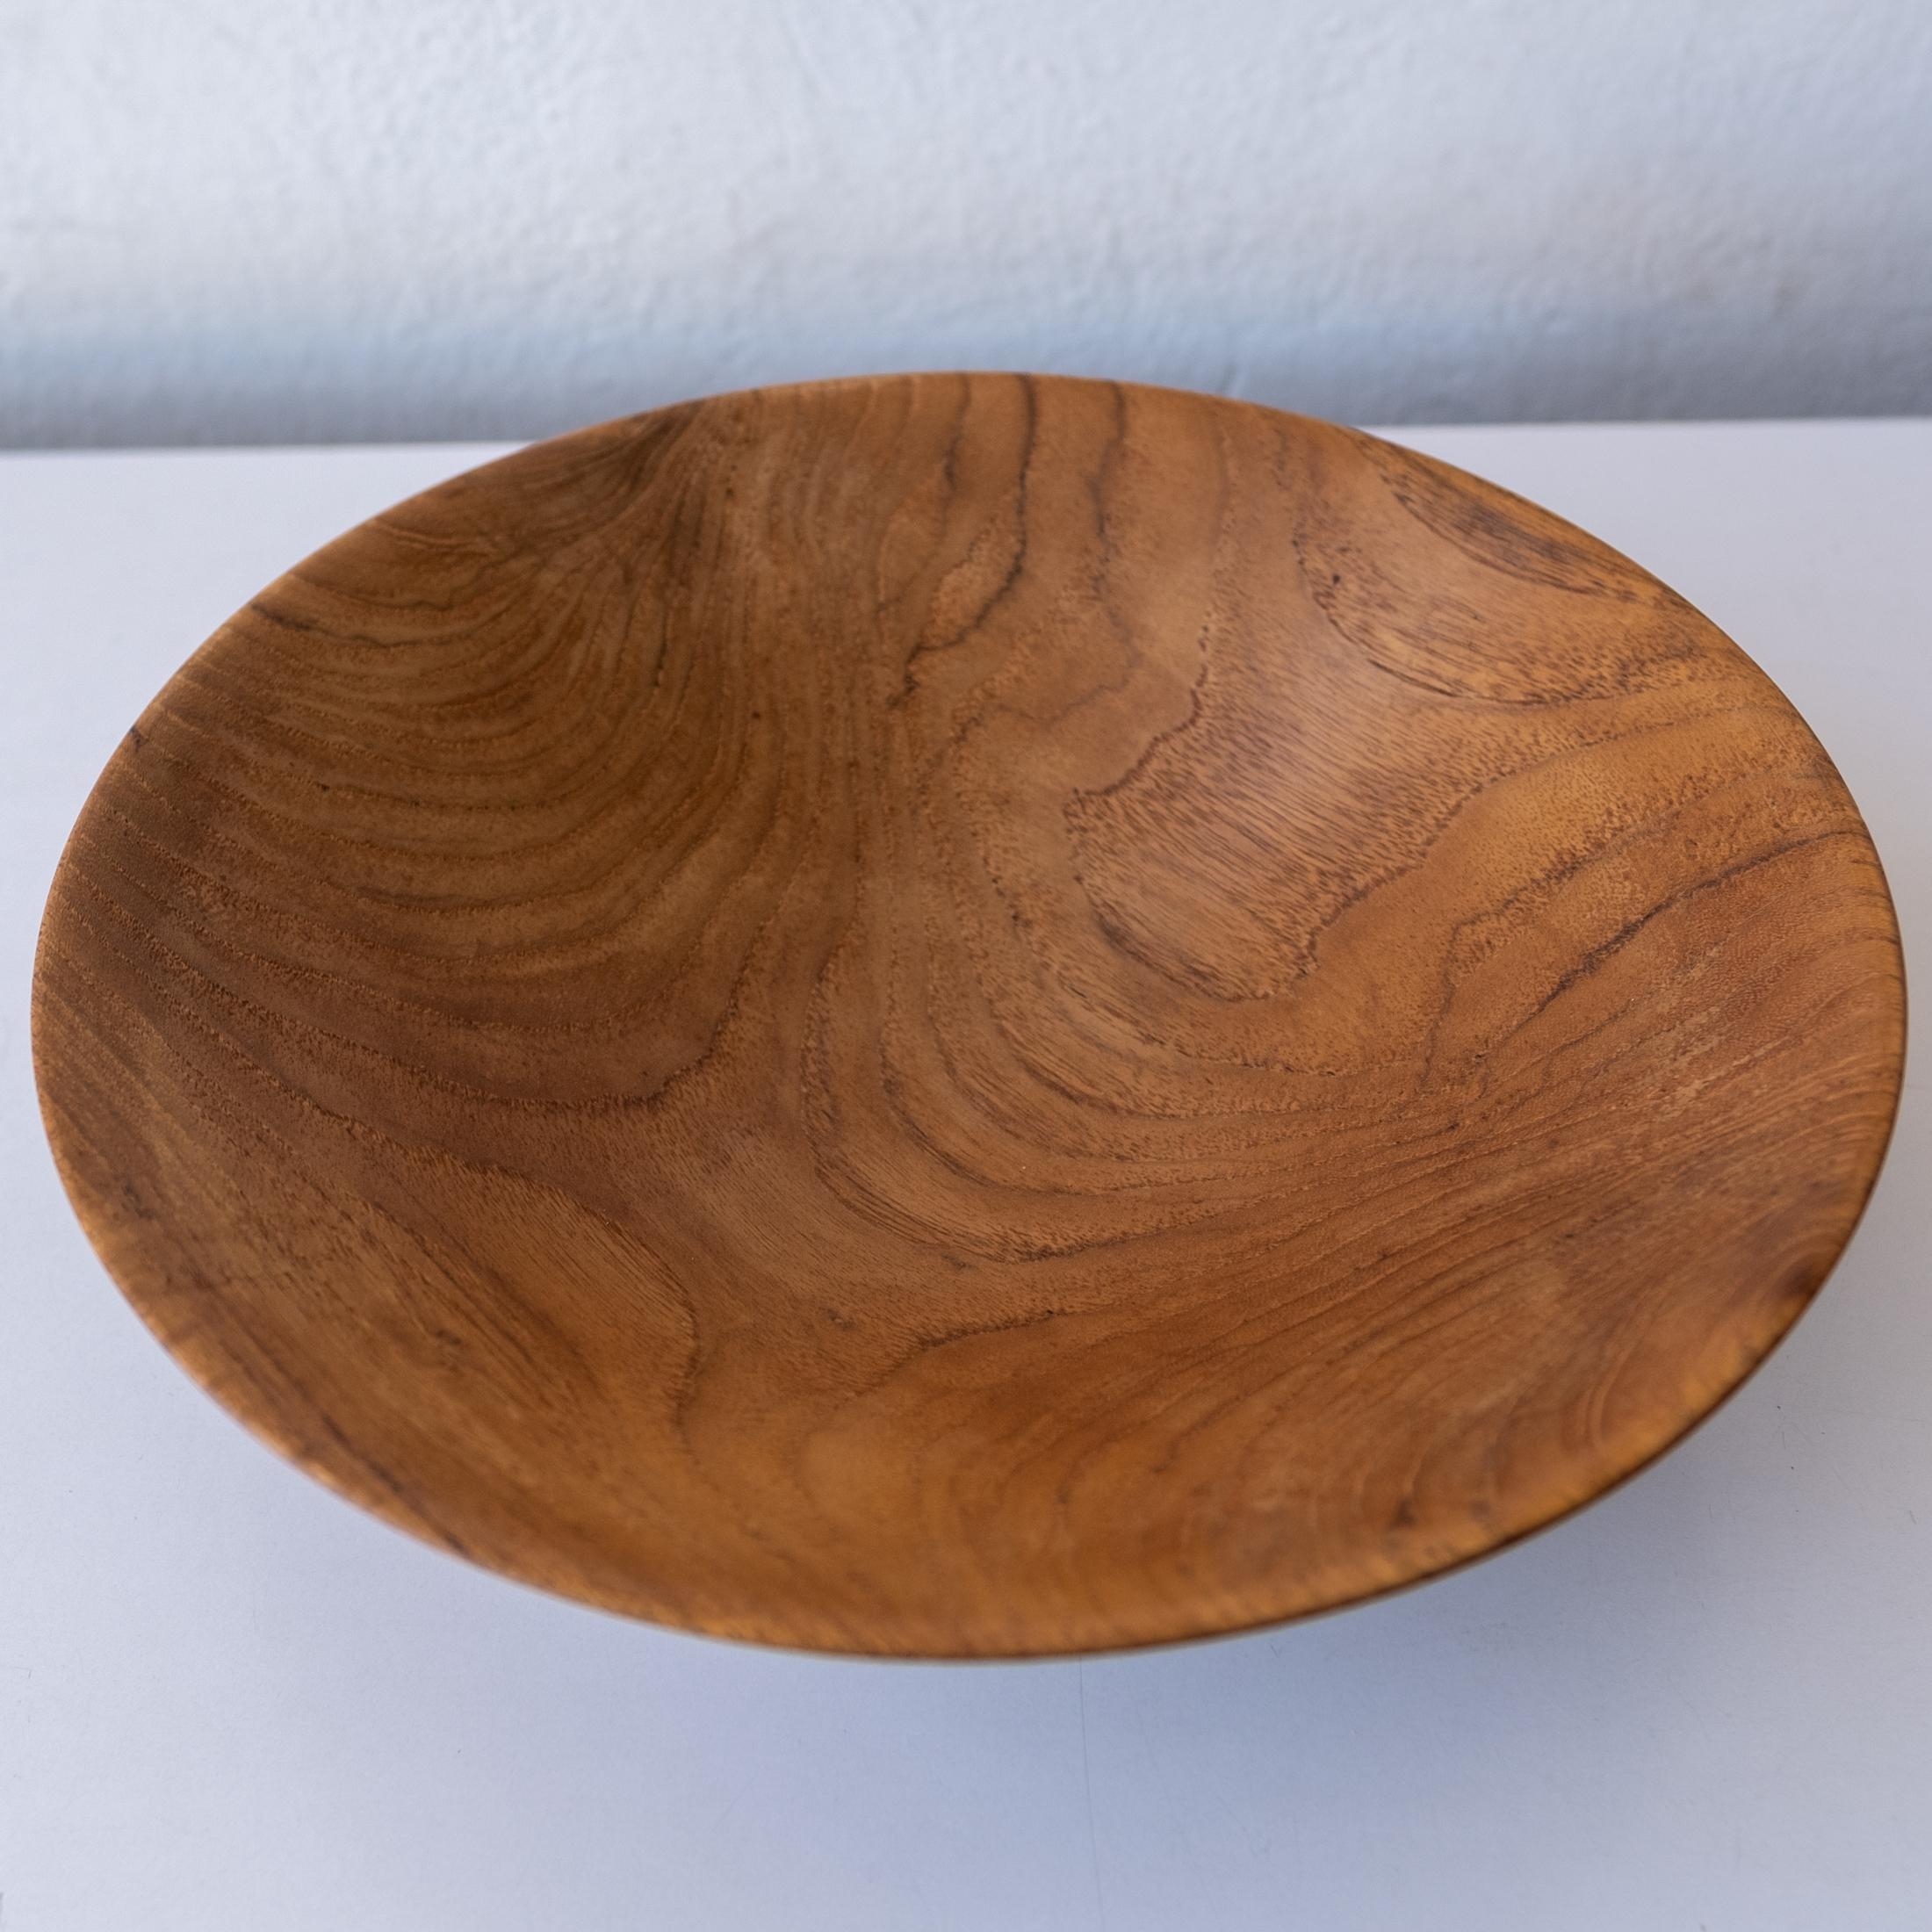 Shigemichi Aomine Modernist Japanese Wood Bowl for the National Craft Council In Good Condition For Sale In San Diego, CA